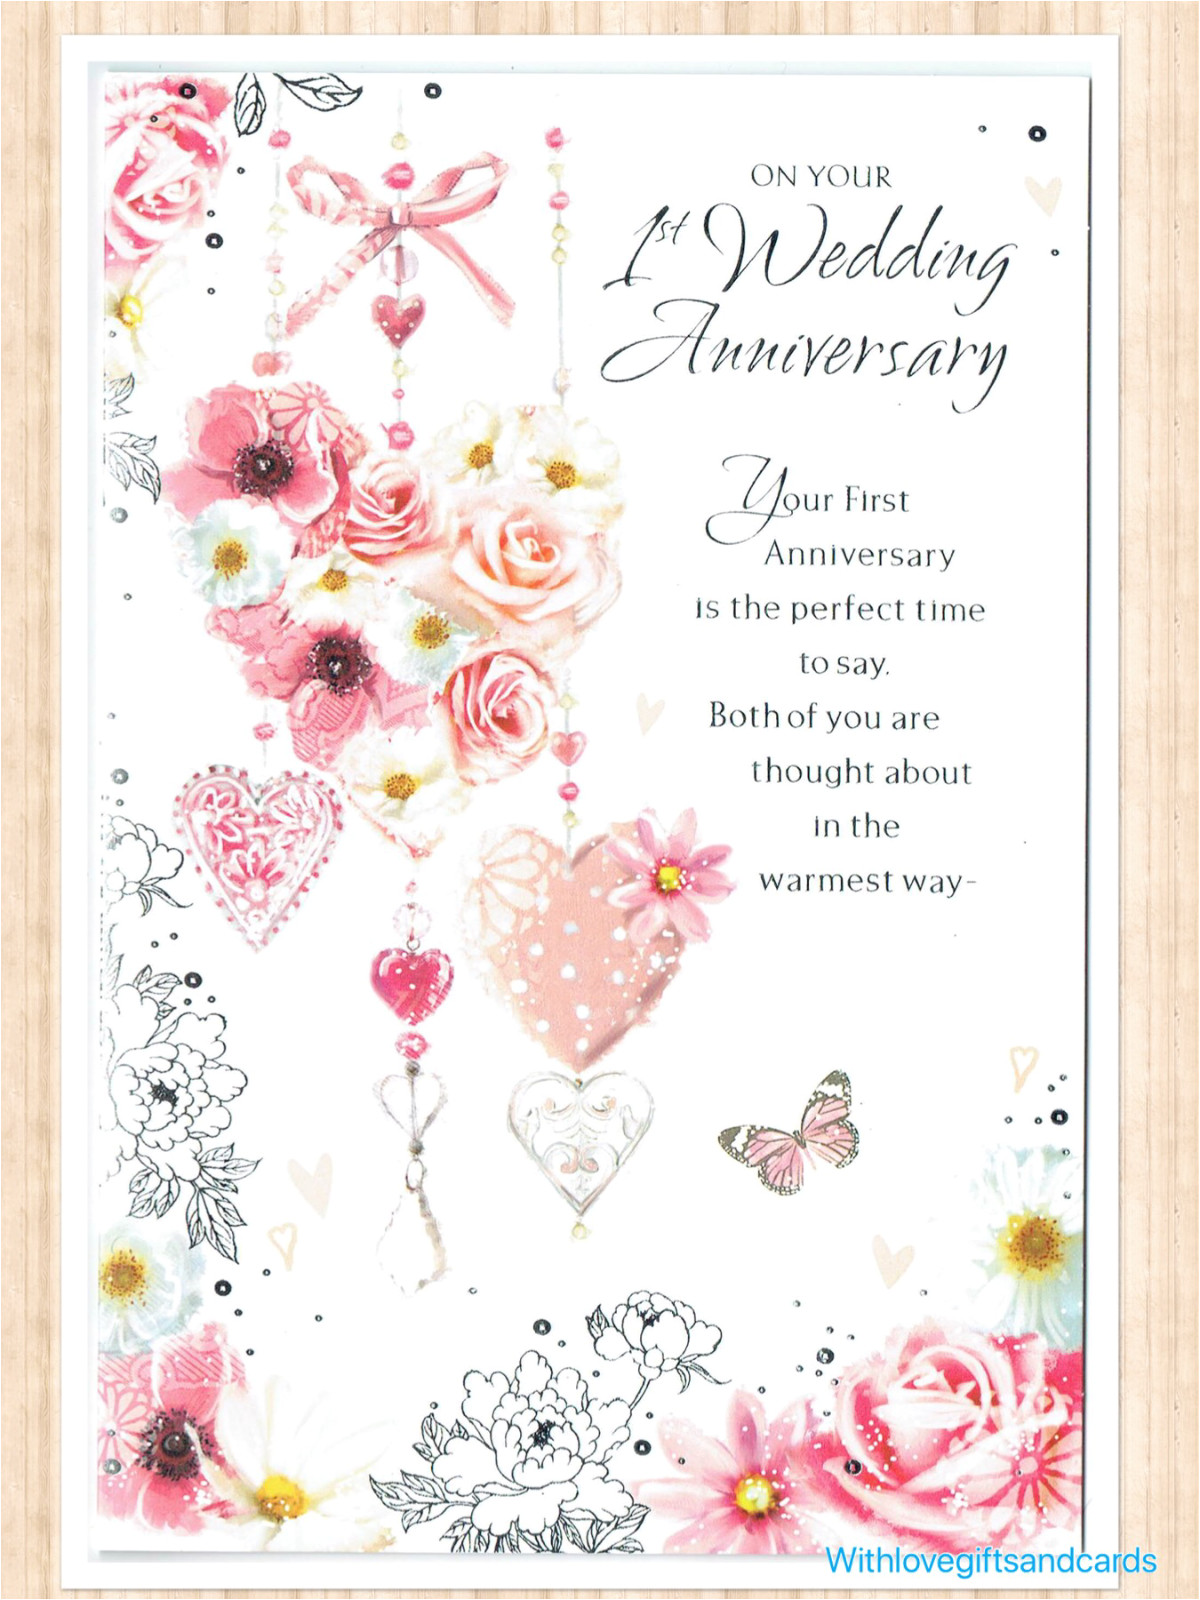 Verse for 1st Wedding Anniversary Card Details About First 1st Wedding Anniversary Card with